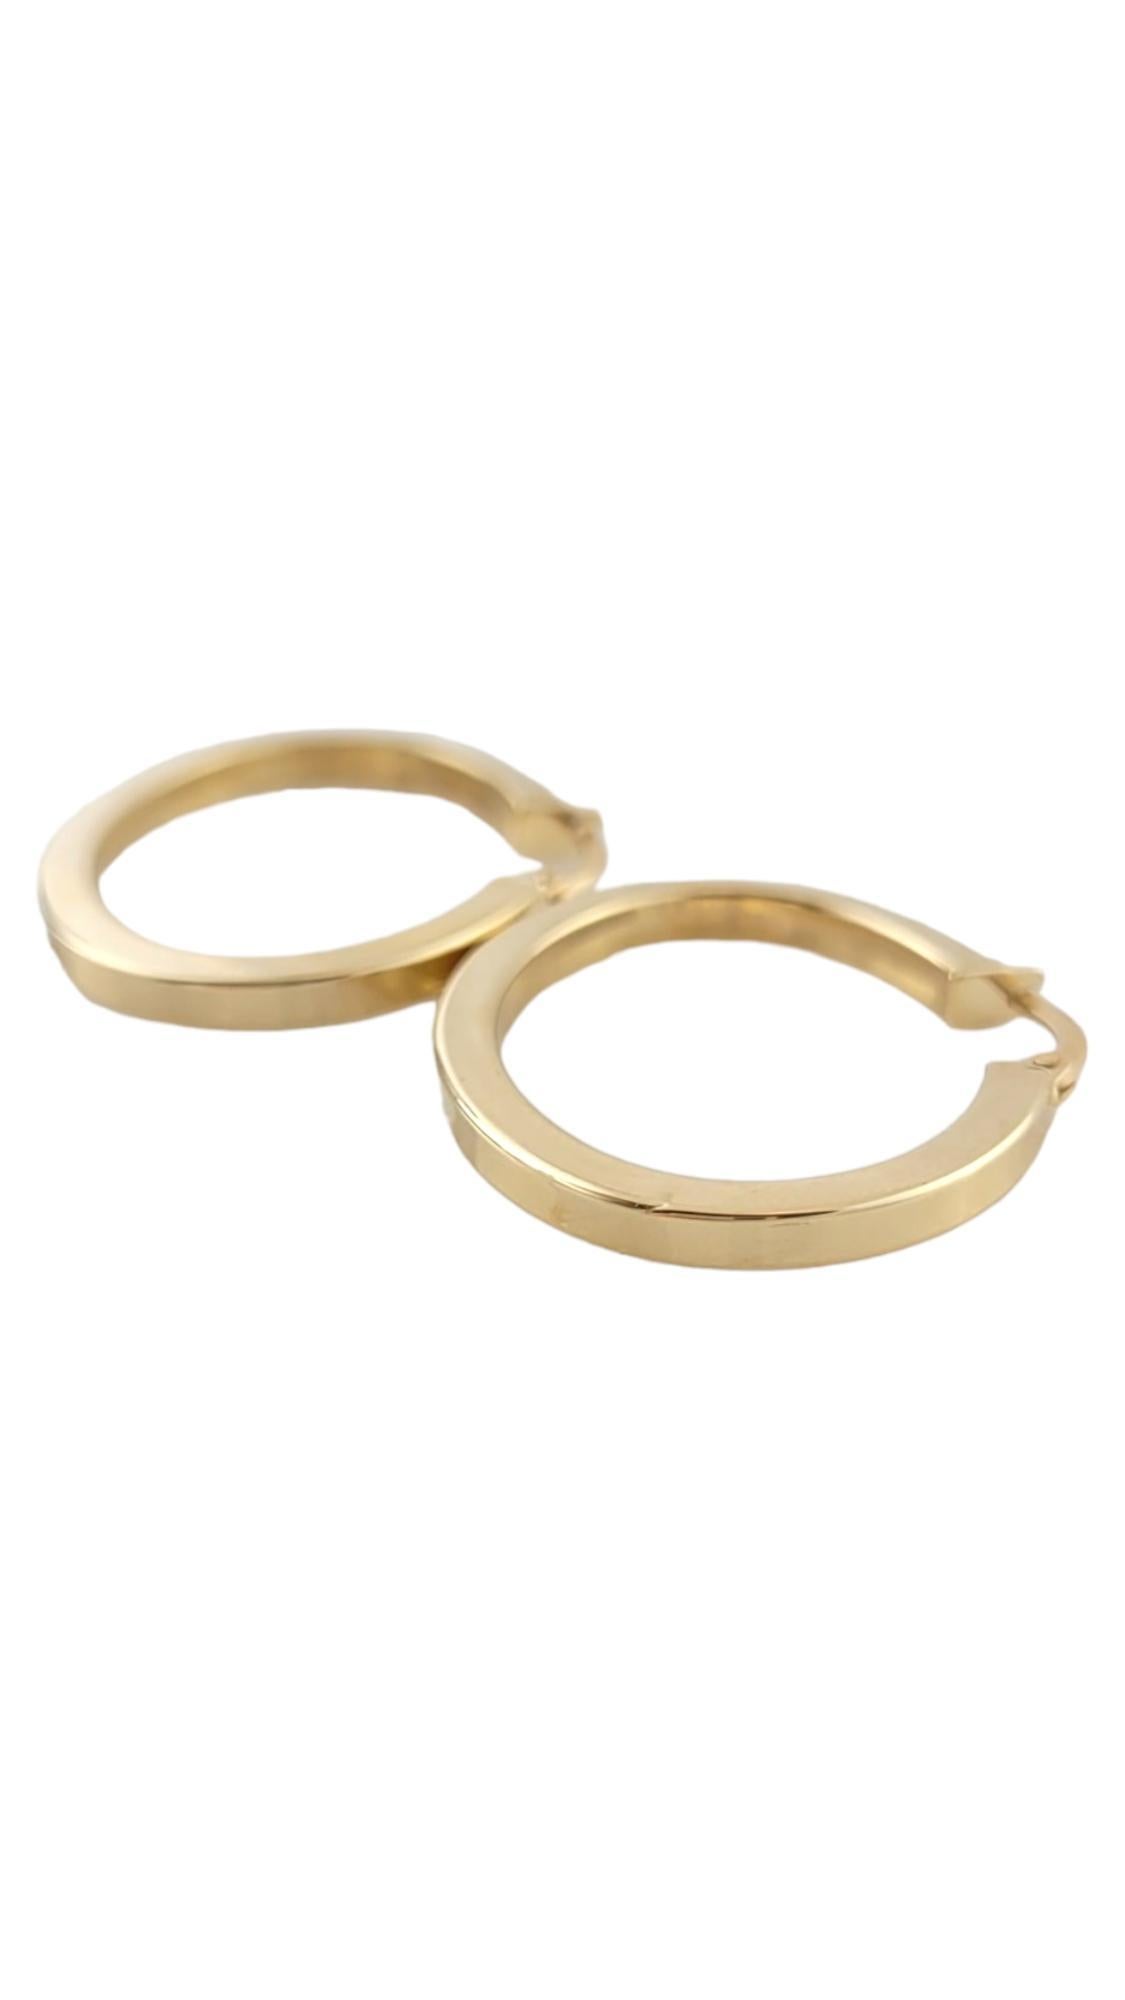 Vintage 14K Yellow Gold Oval Hoop Earrings

This beautiful set of oval hoops are crafted from 14K yellow gold for a gorgeous finish!

Size: 24.78mm X 30.04mm X 2.5mm

Weight: 1.35 dwt/ 2.09 g

Hallmark: 14KT ITALY

Very good condition,